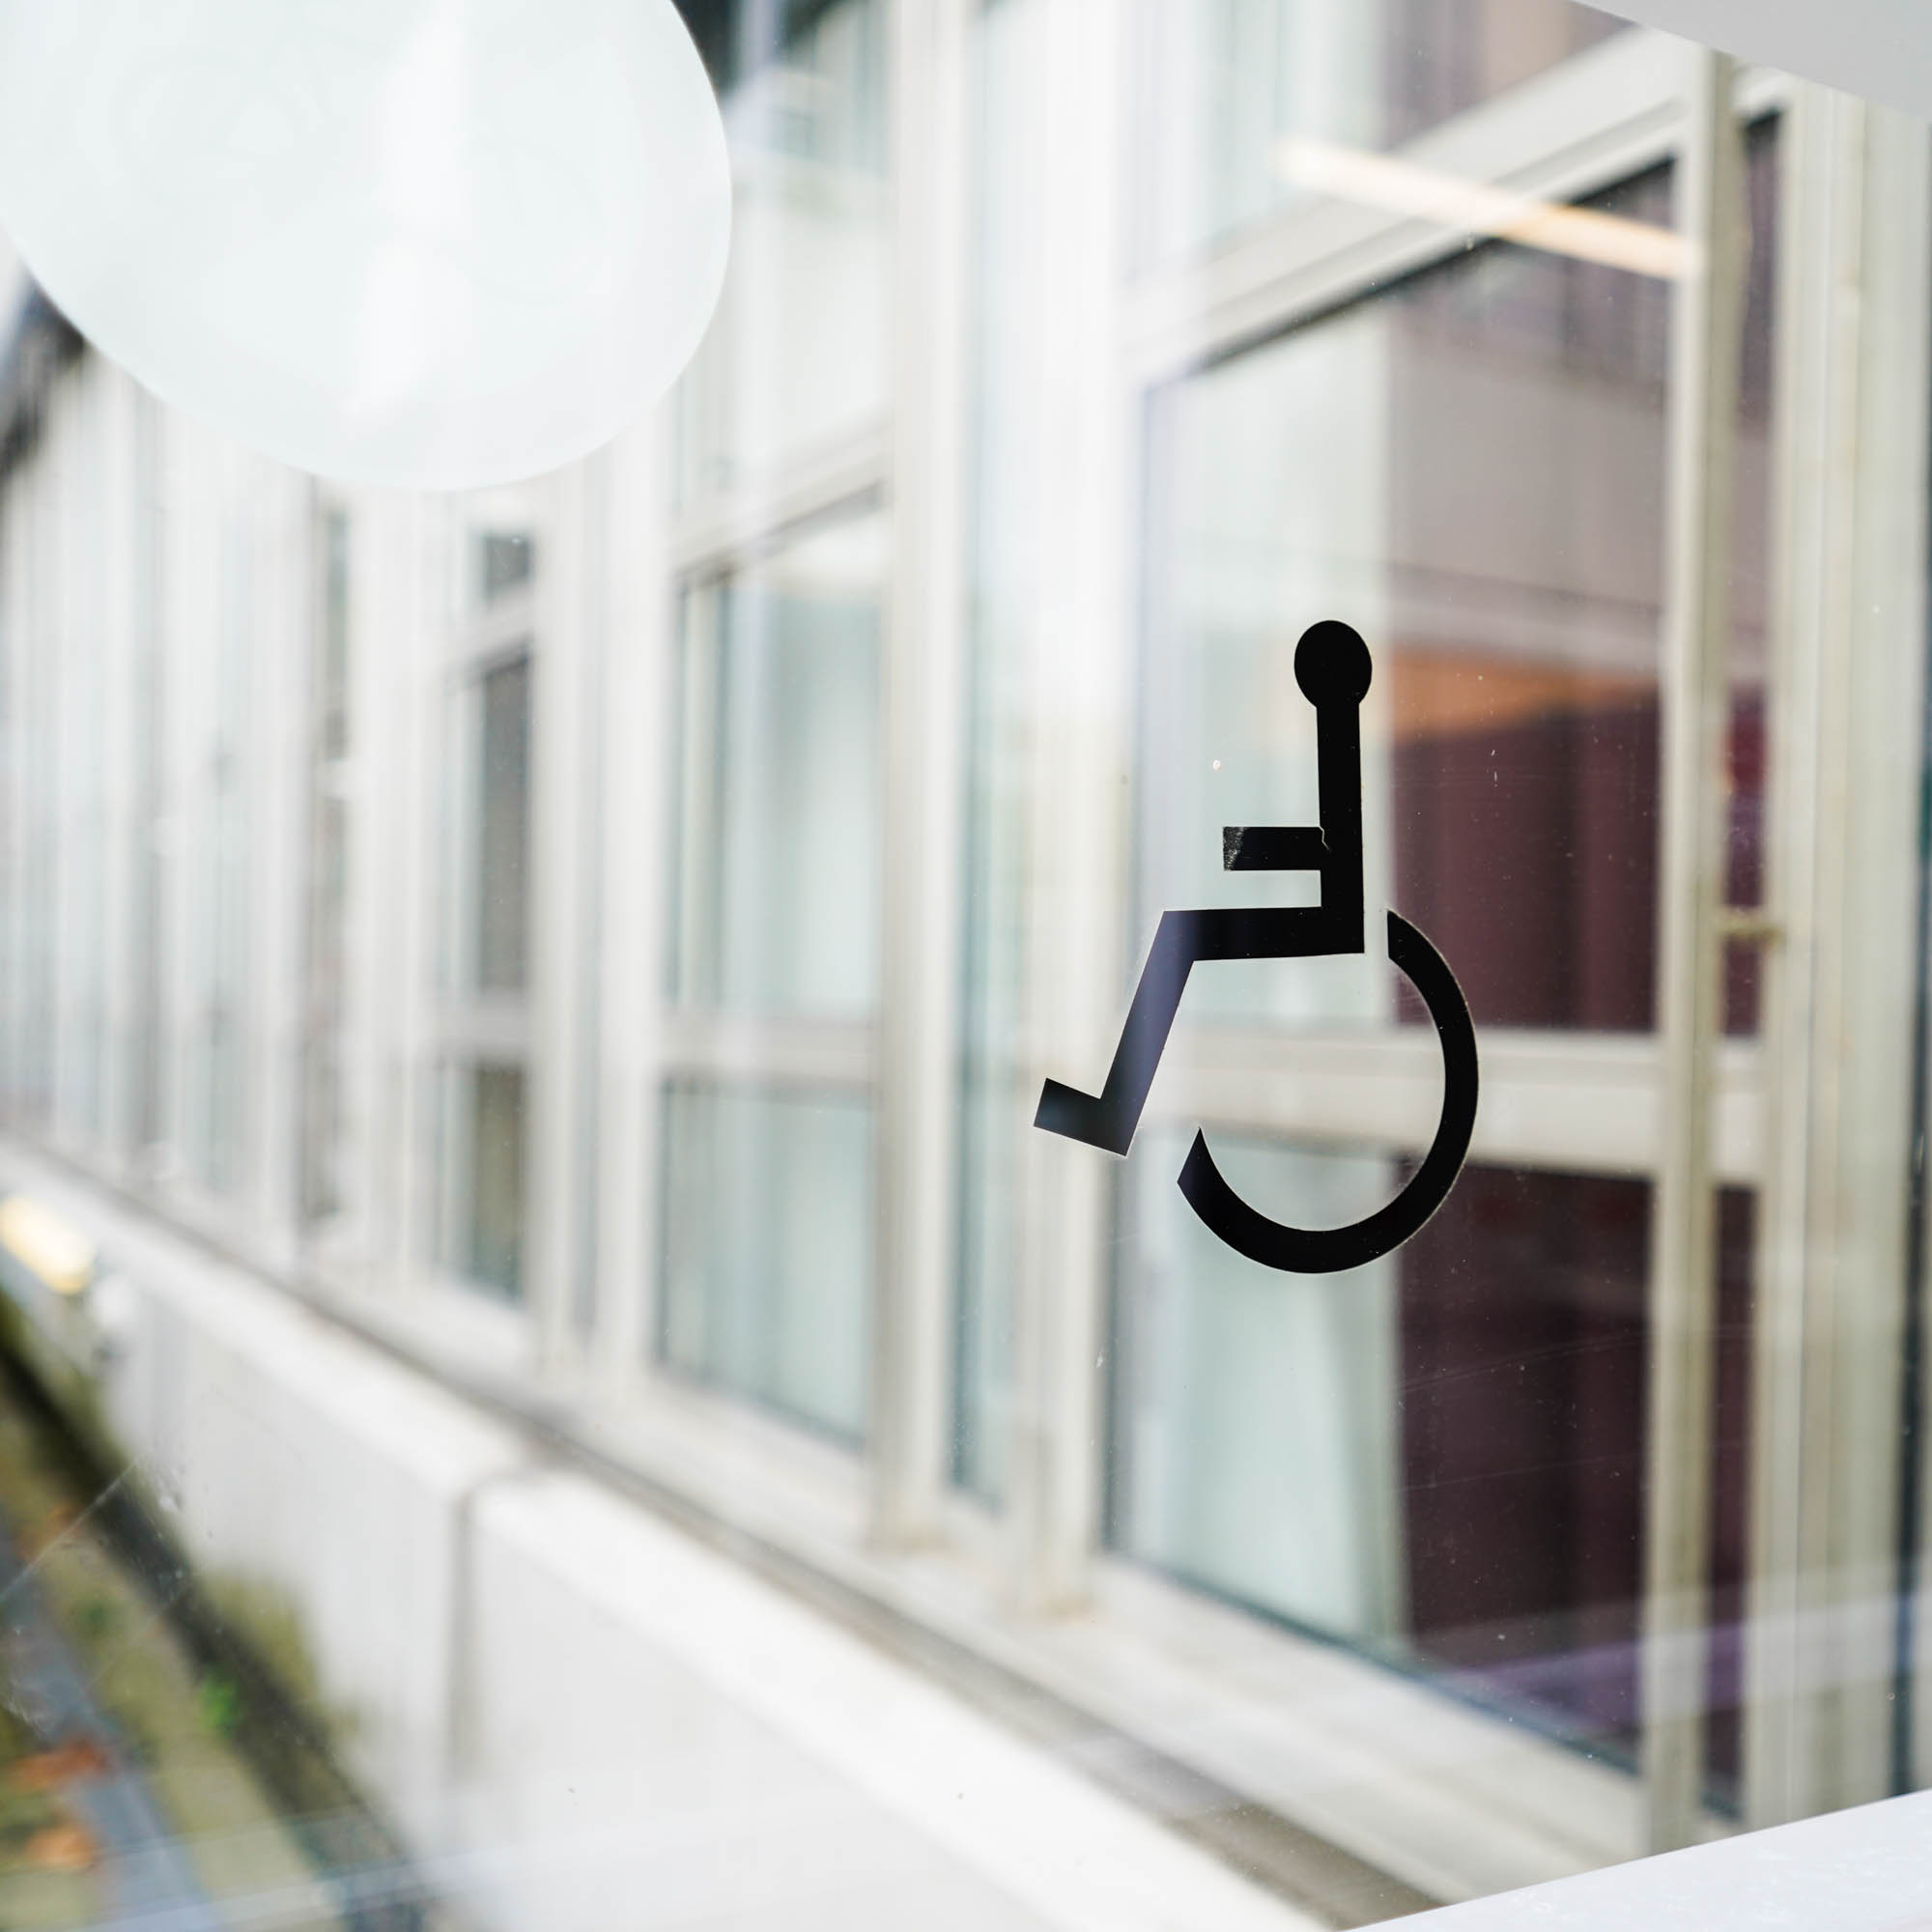 On a glass door the abstract sign of a wheelchair user